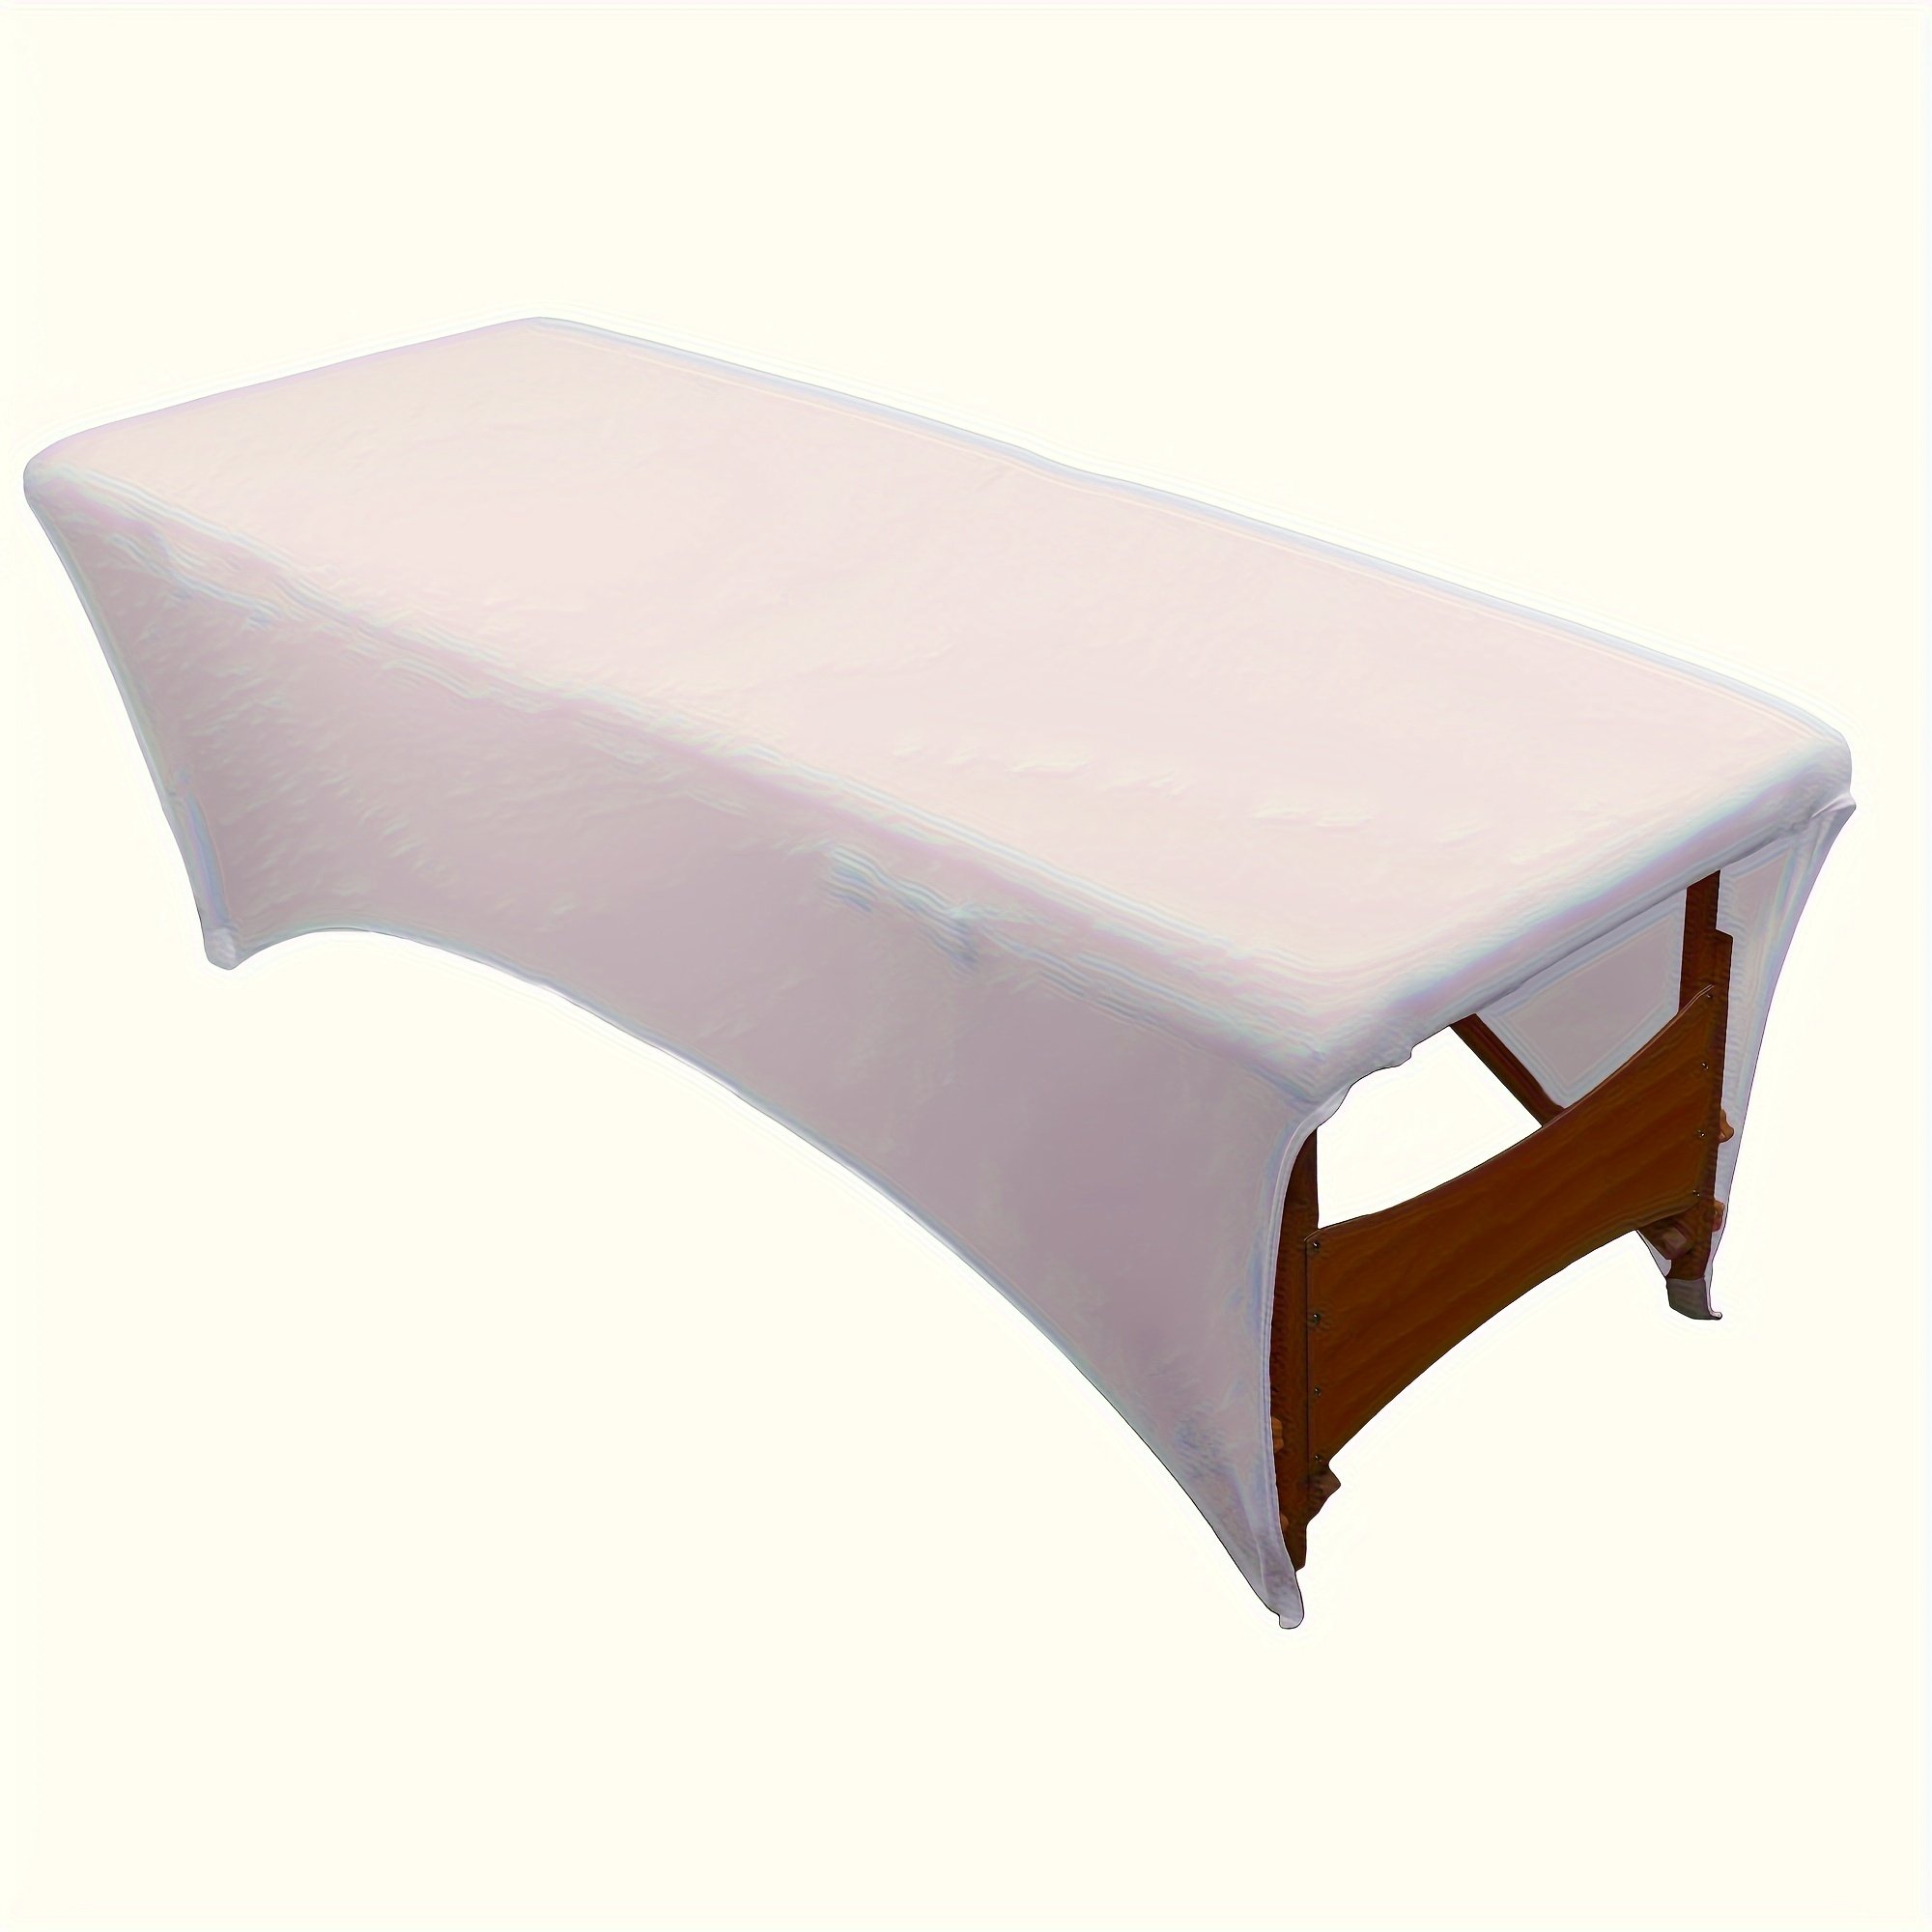 STRETCHABLE LASH BED COVER: RECTANGULAR FITTED